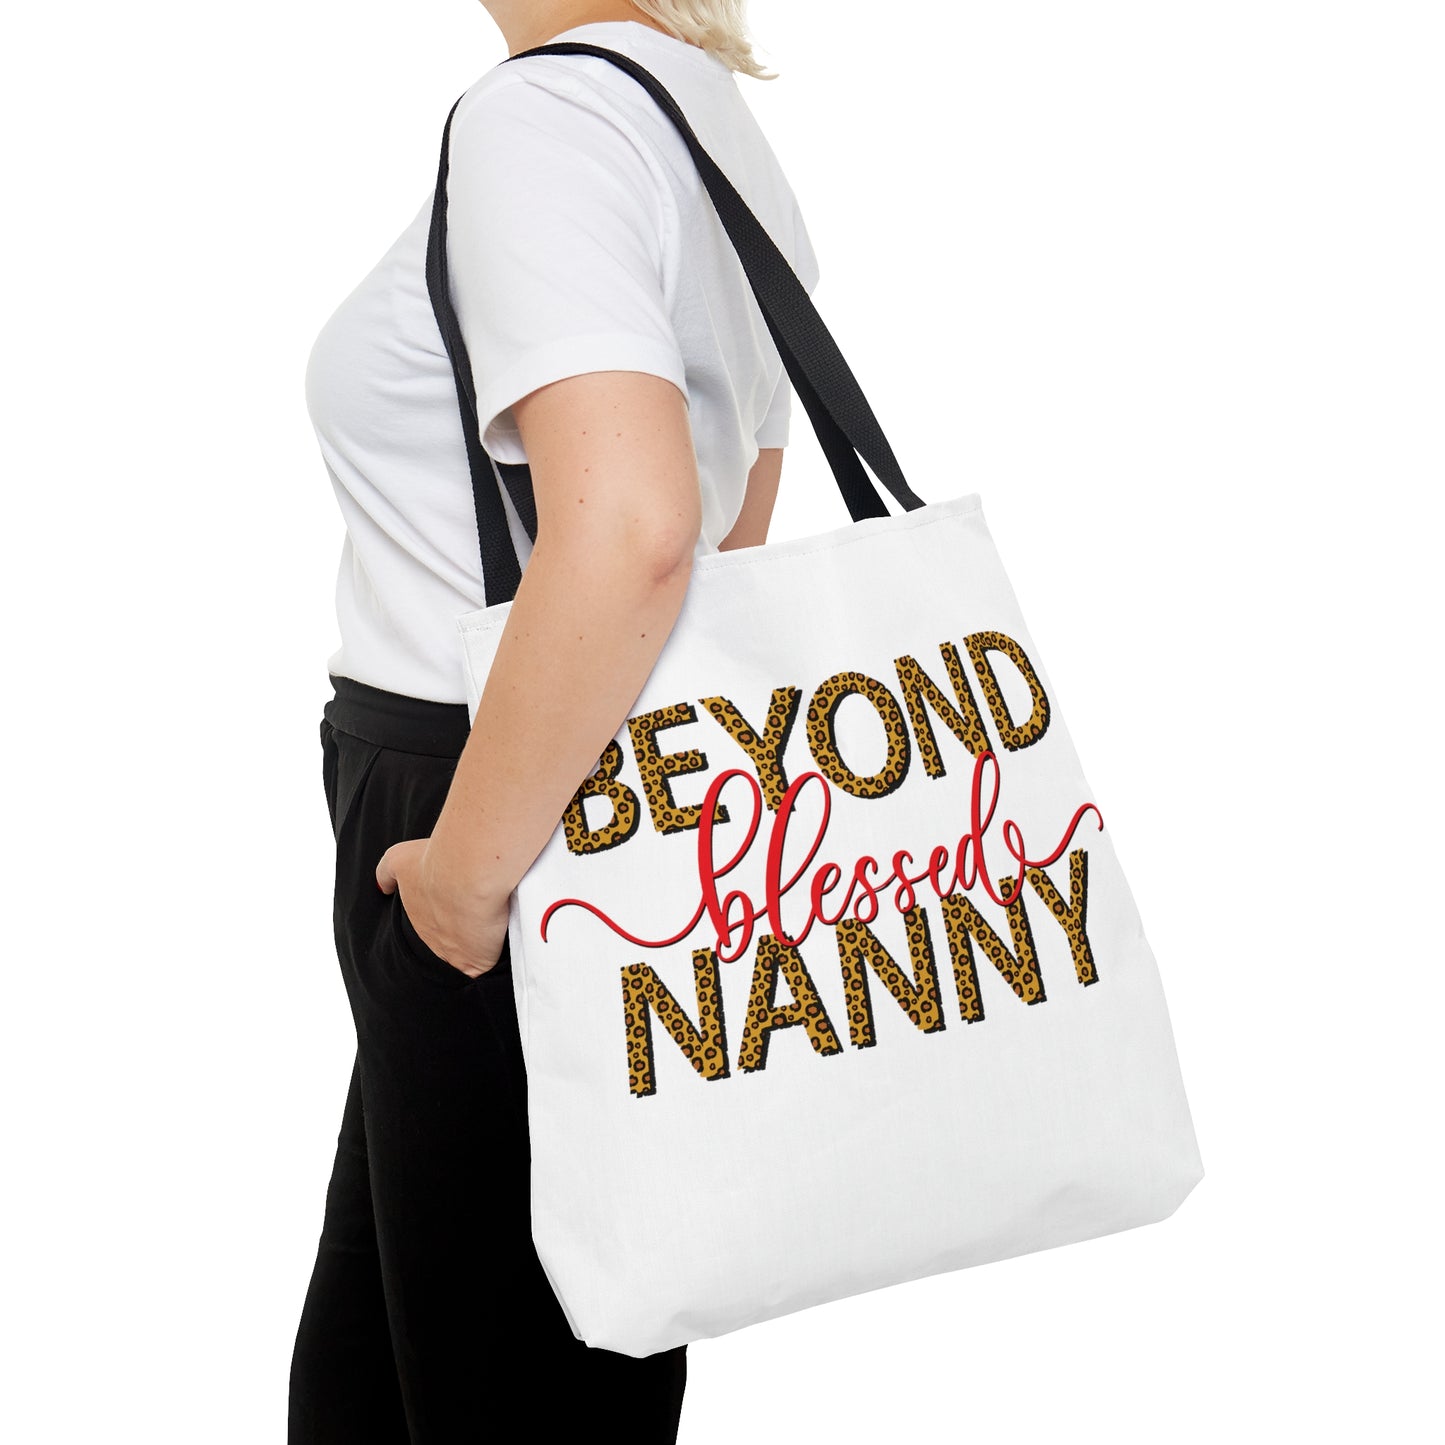 Beyond Blessed Nanny - Red - Tote Bag (AOP)